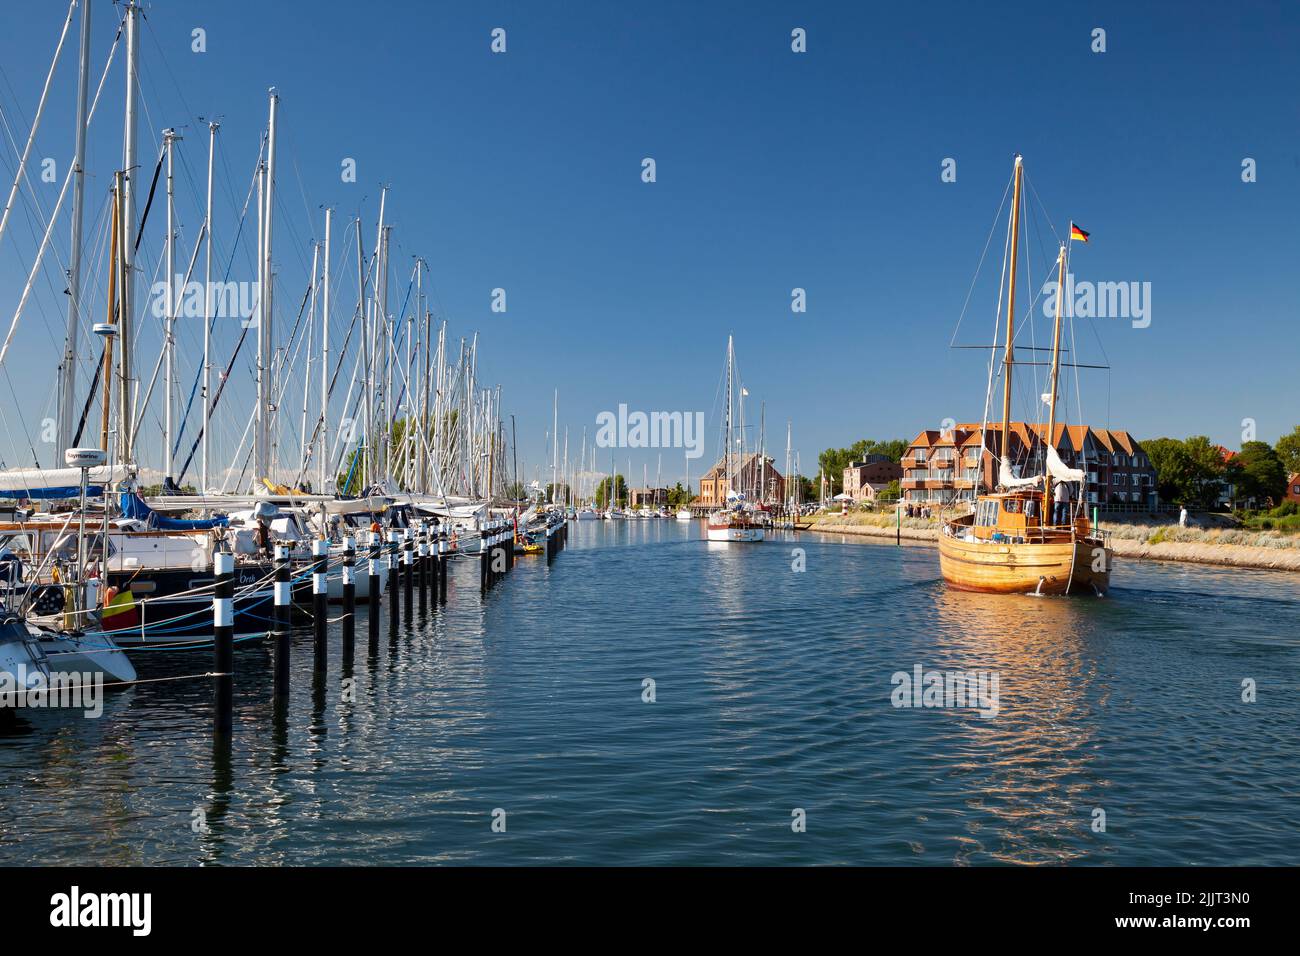 Port of Orth with sailingboats Fehmarn Island, Baltic Sea, Schleswig-Holstein, Germany, Europe Stock Photo